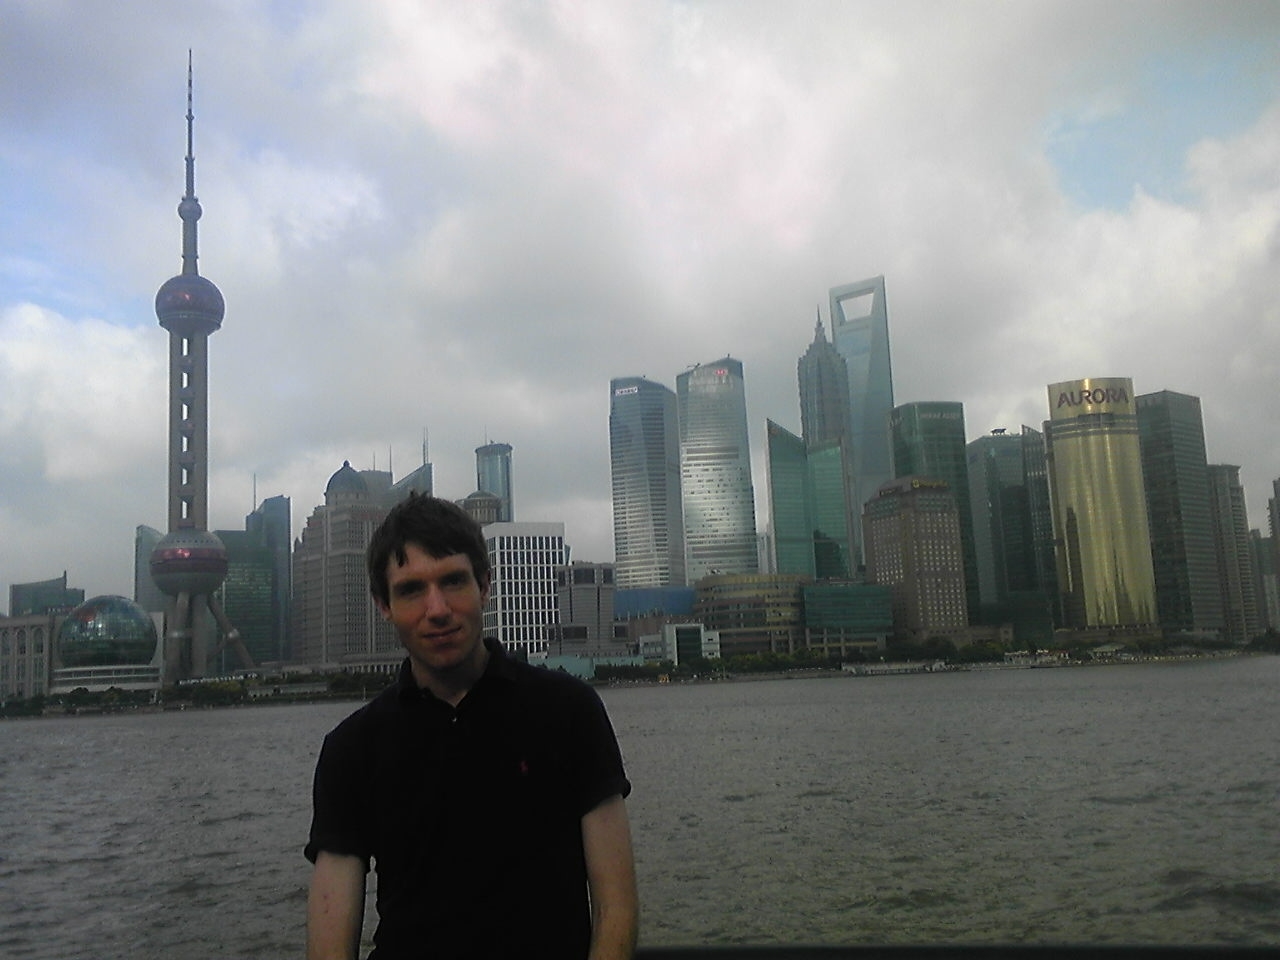 Planes, Trains and Gardens – Shanghai Part 1 – by Christian